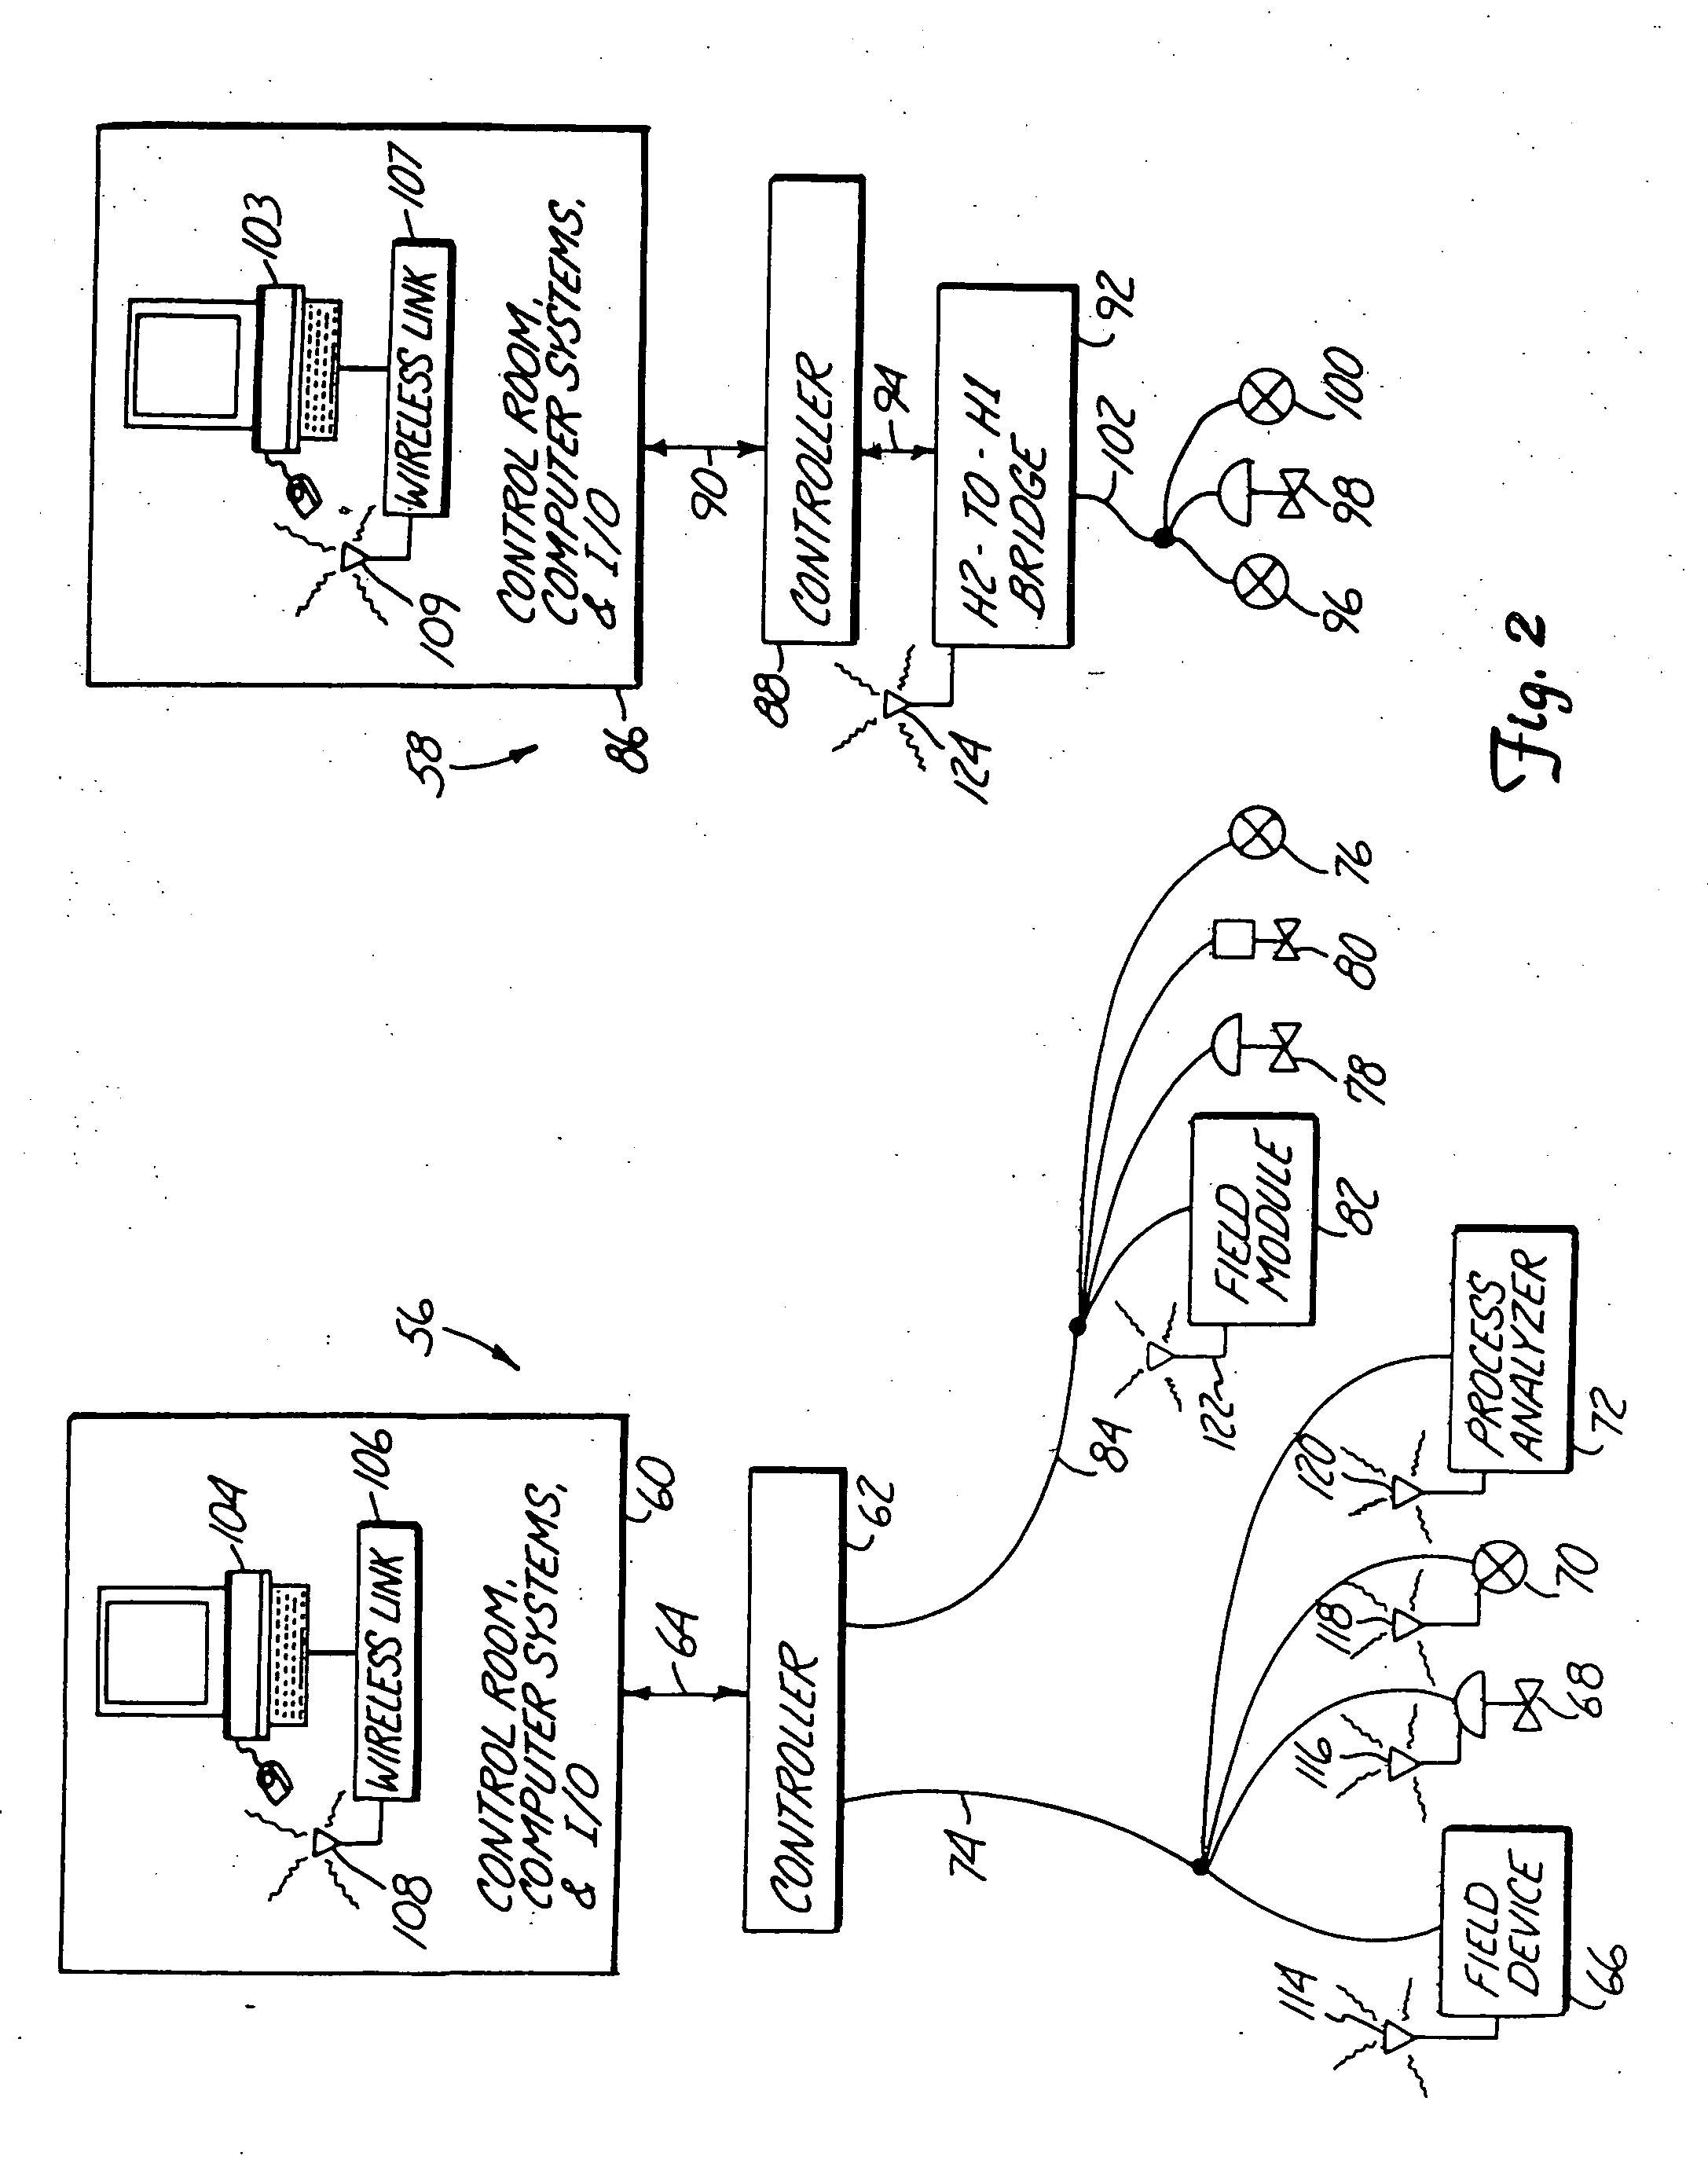 Wireless communications within a process control system using a bus protocol